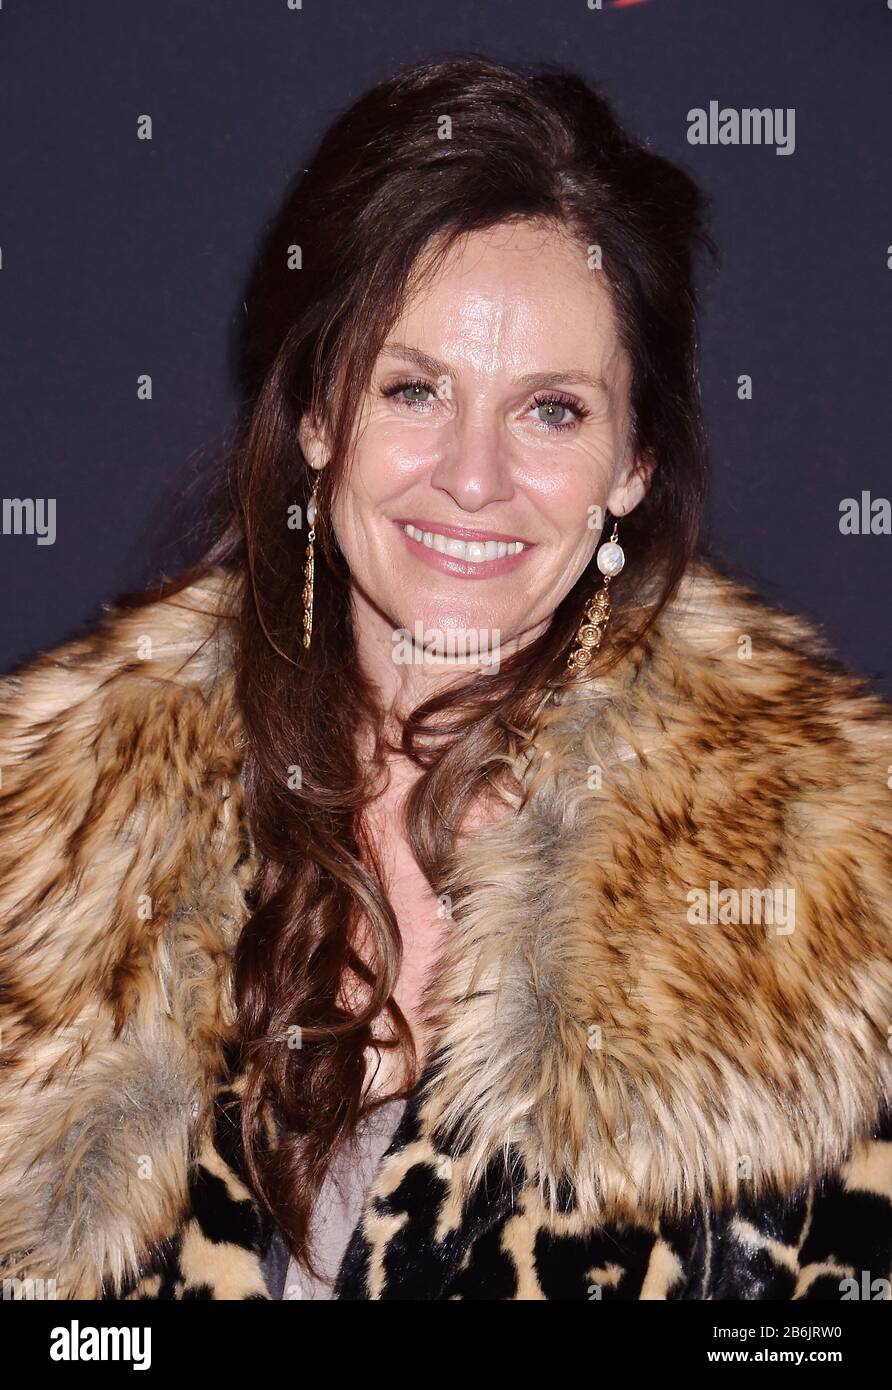 HOLLYWOOD, CA - MARCH 09: Amy Brenneman attends the premiere of Disney's 'Mulan' at the El Capitan Theatre on March 09, 2020 in Hollywood, California. Stock Photo